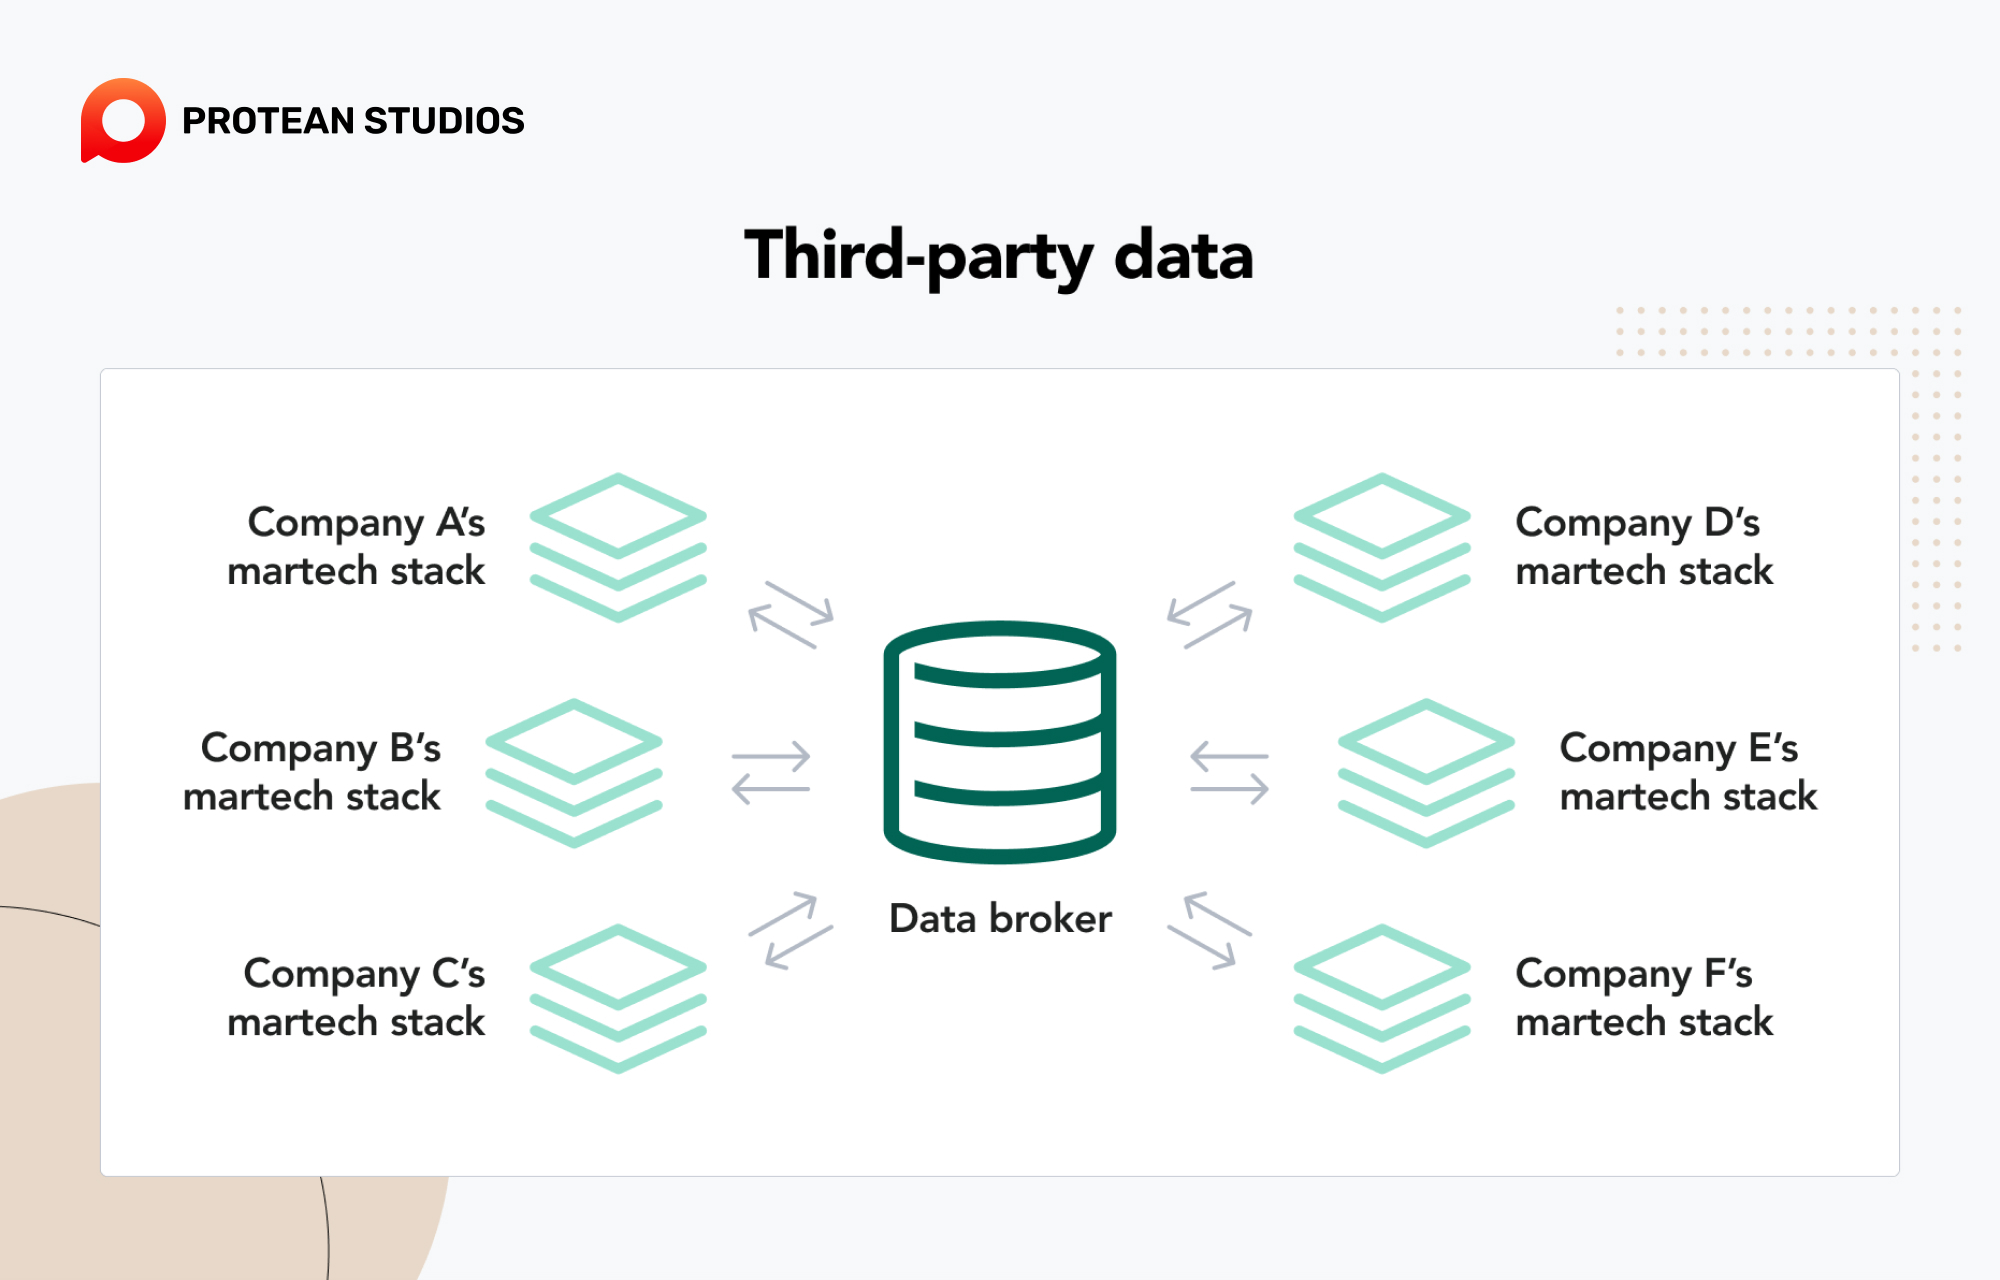 Definition and features of third-party data